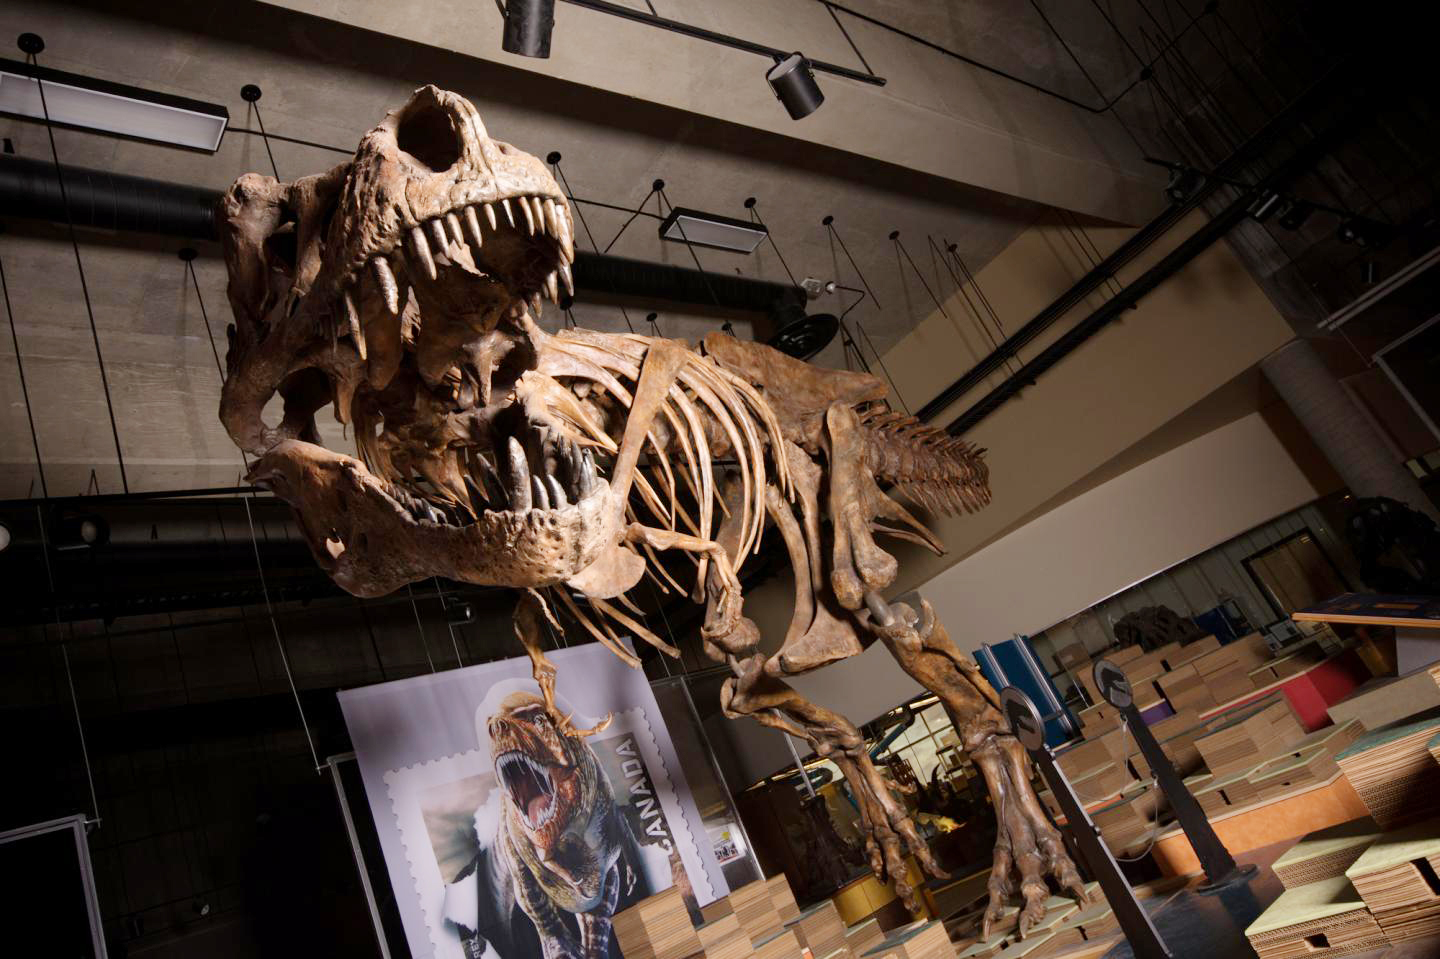 PHOTO:The towering and battle-scarred "Scotty"reported by UAlberta paleontologists is the world's largest Tyrannosaurus rex and the largest dinosaur skeleton ever found in Canada.